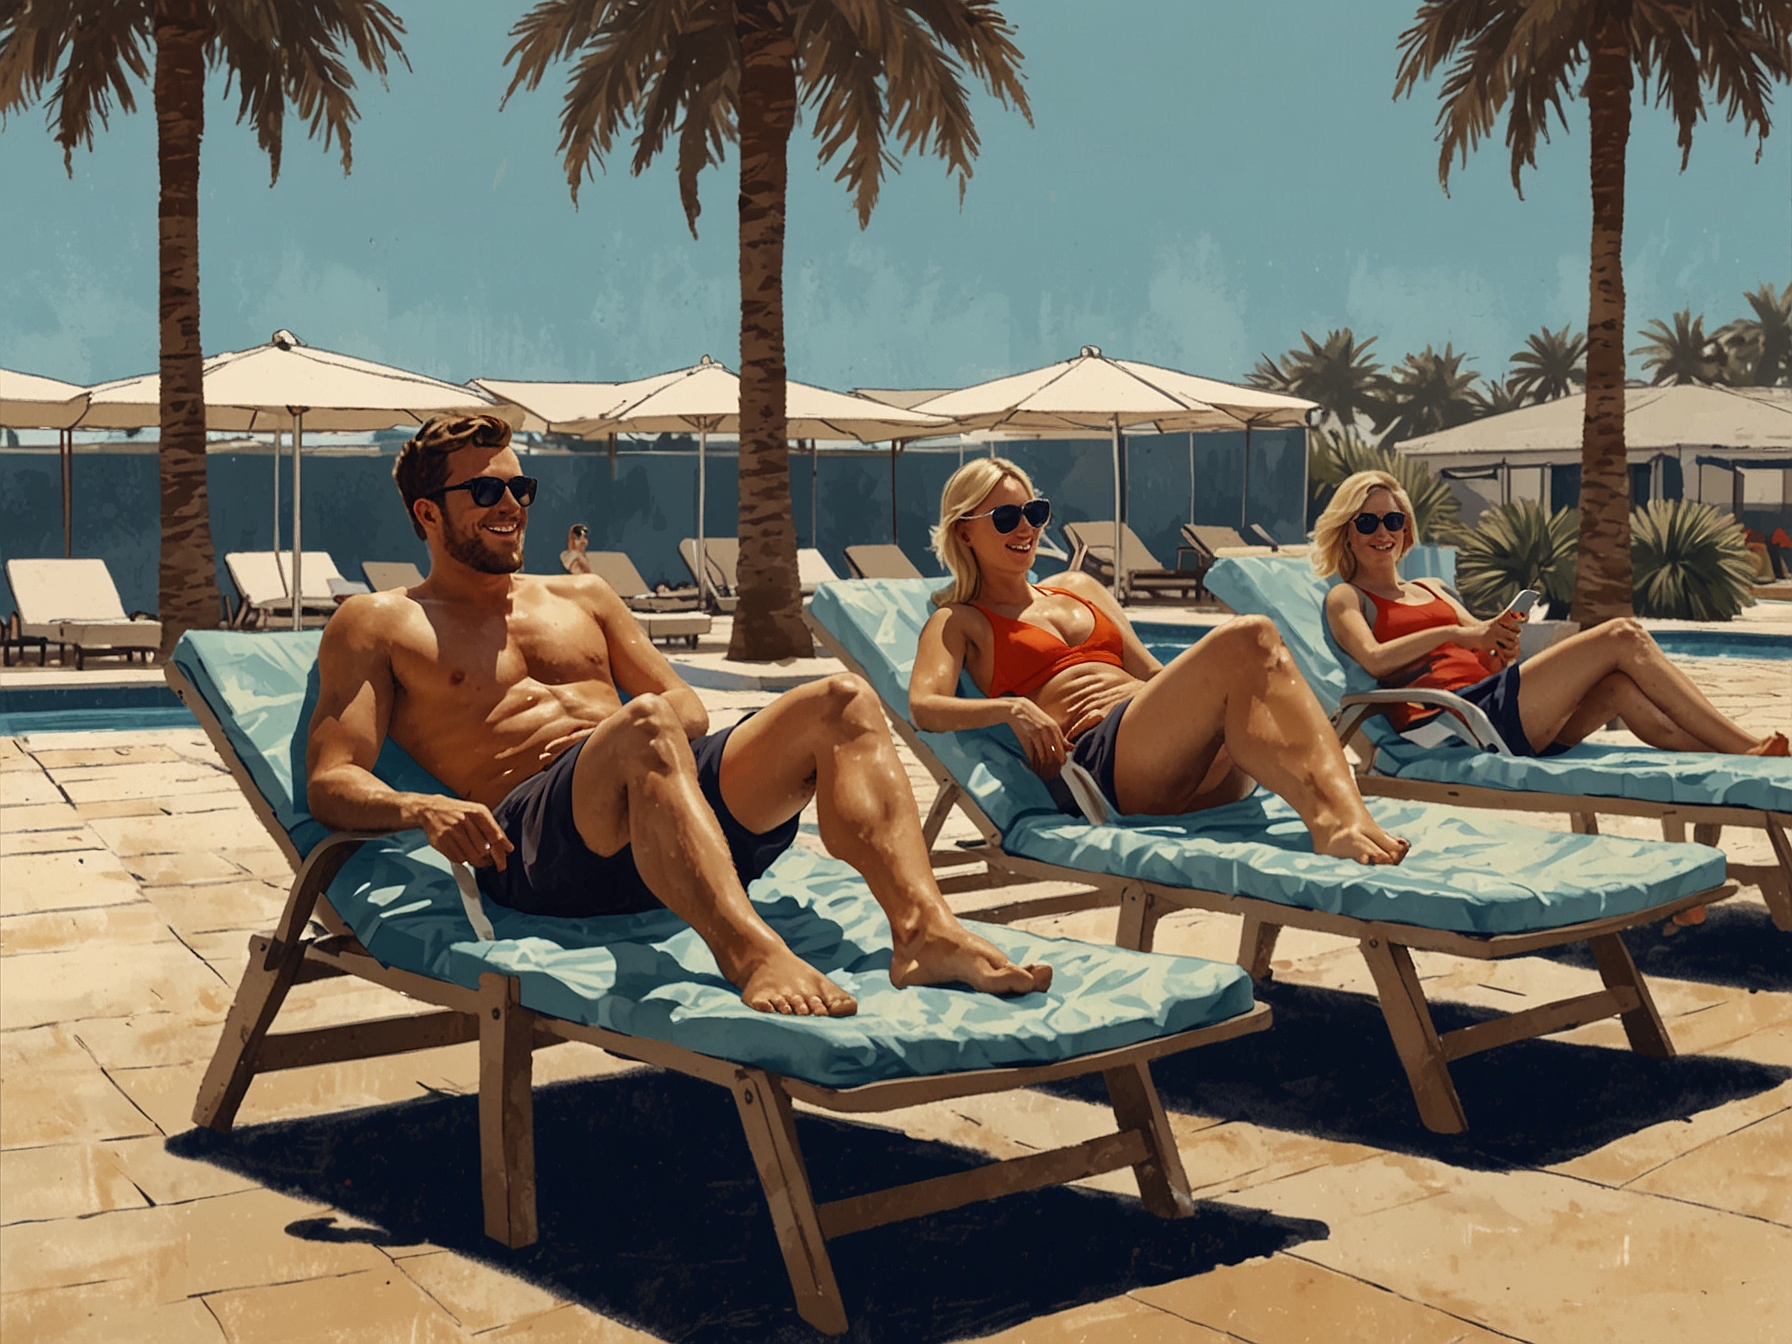 A group of British holidaymakers happily lounging on sunbeds by the pool, with some empty sun loungers in the background, highlighting their success in the 'towel race' each morning.